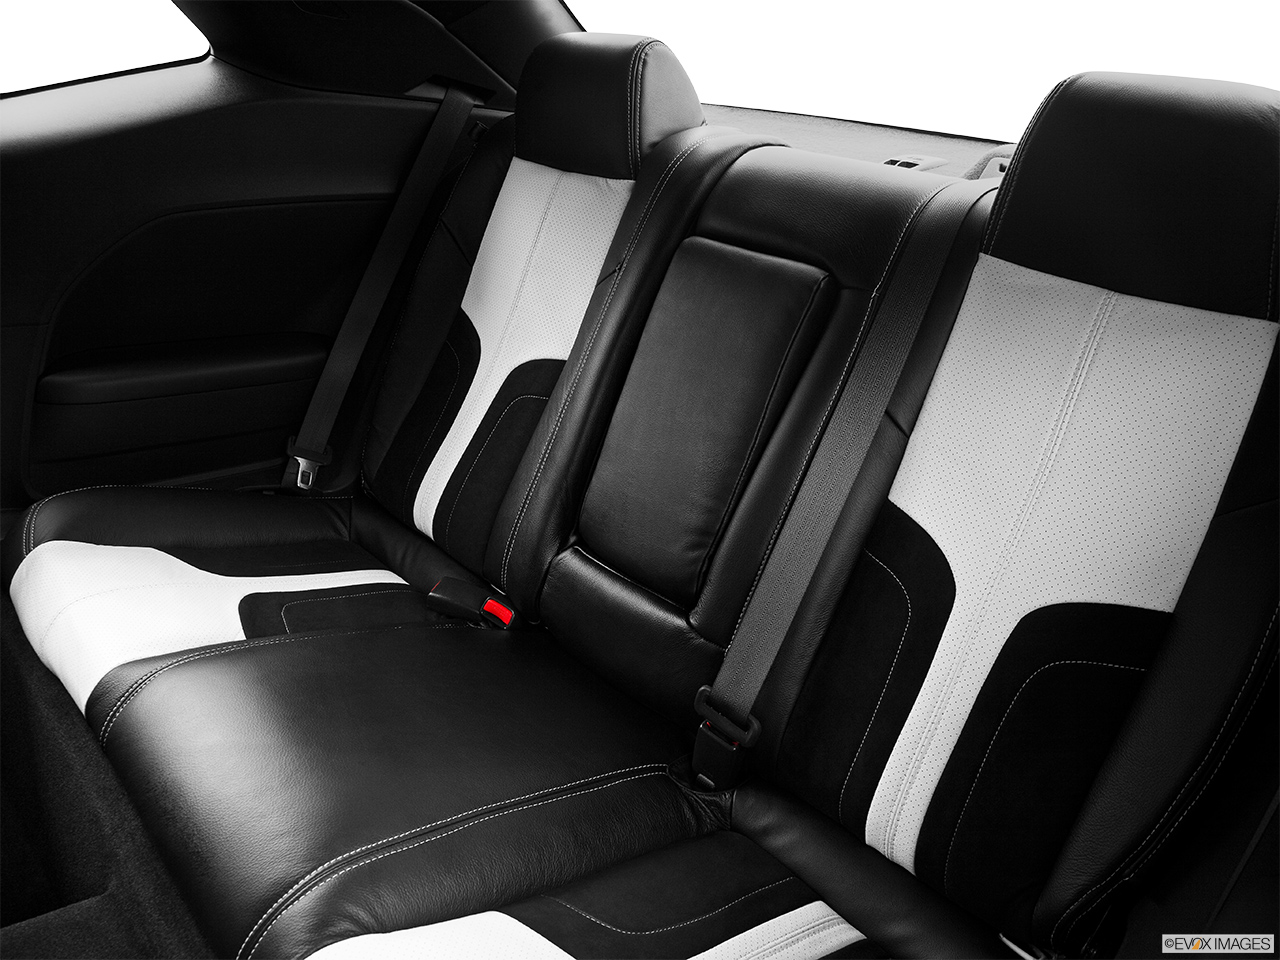 2014 Saleen 570 Challenger Label 570 Black Label Rear seats from Drivers Side. 